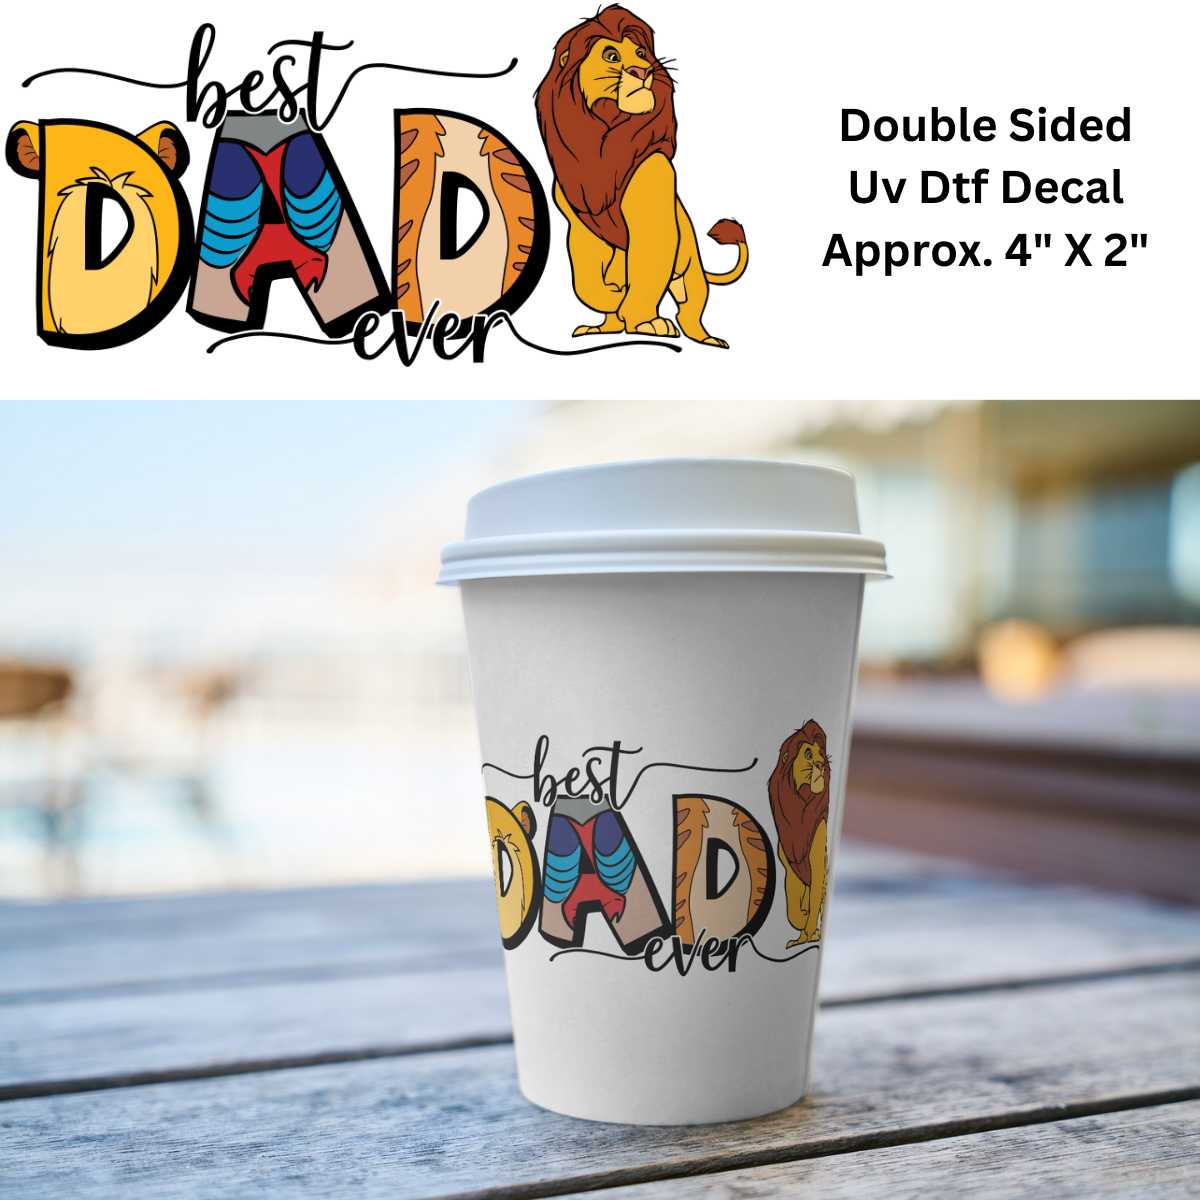 Uv Dtf Decal Best Dad Ever | Double Sided